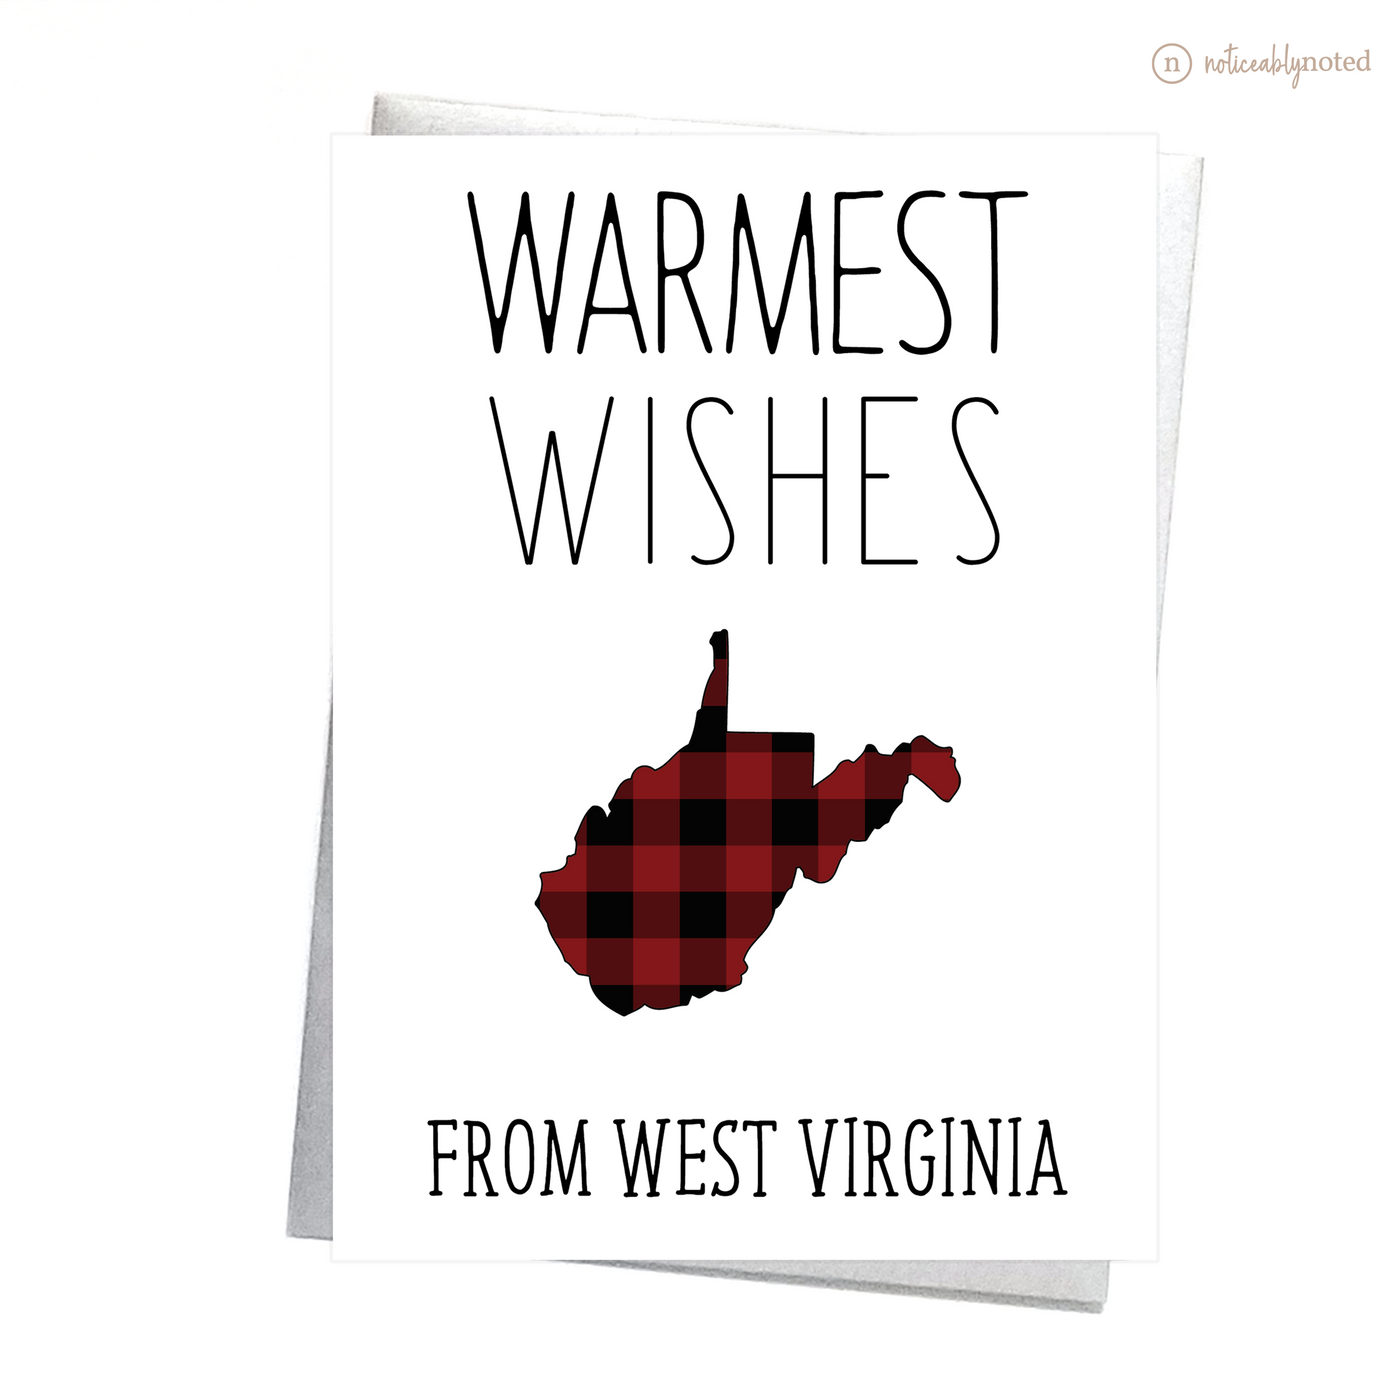 West Virginia Holiday Card - Warmest Wishes | Noticeably Noted